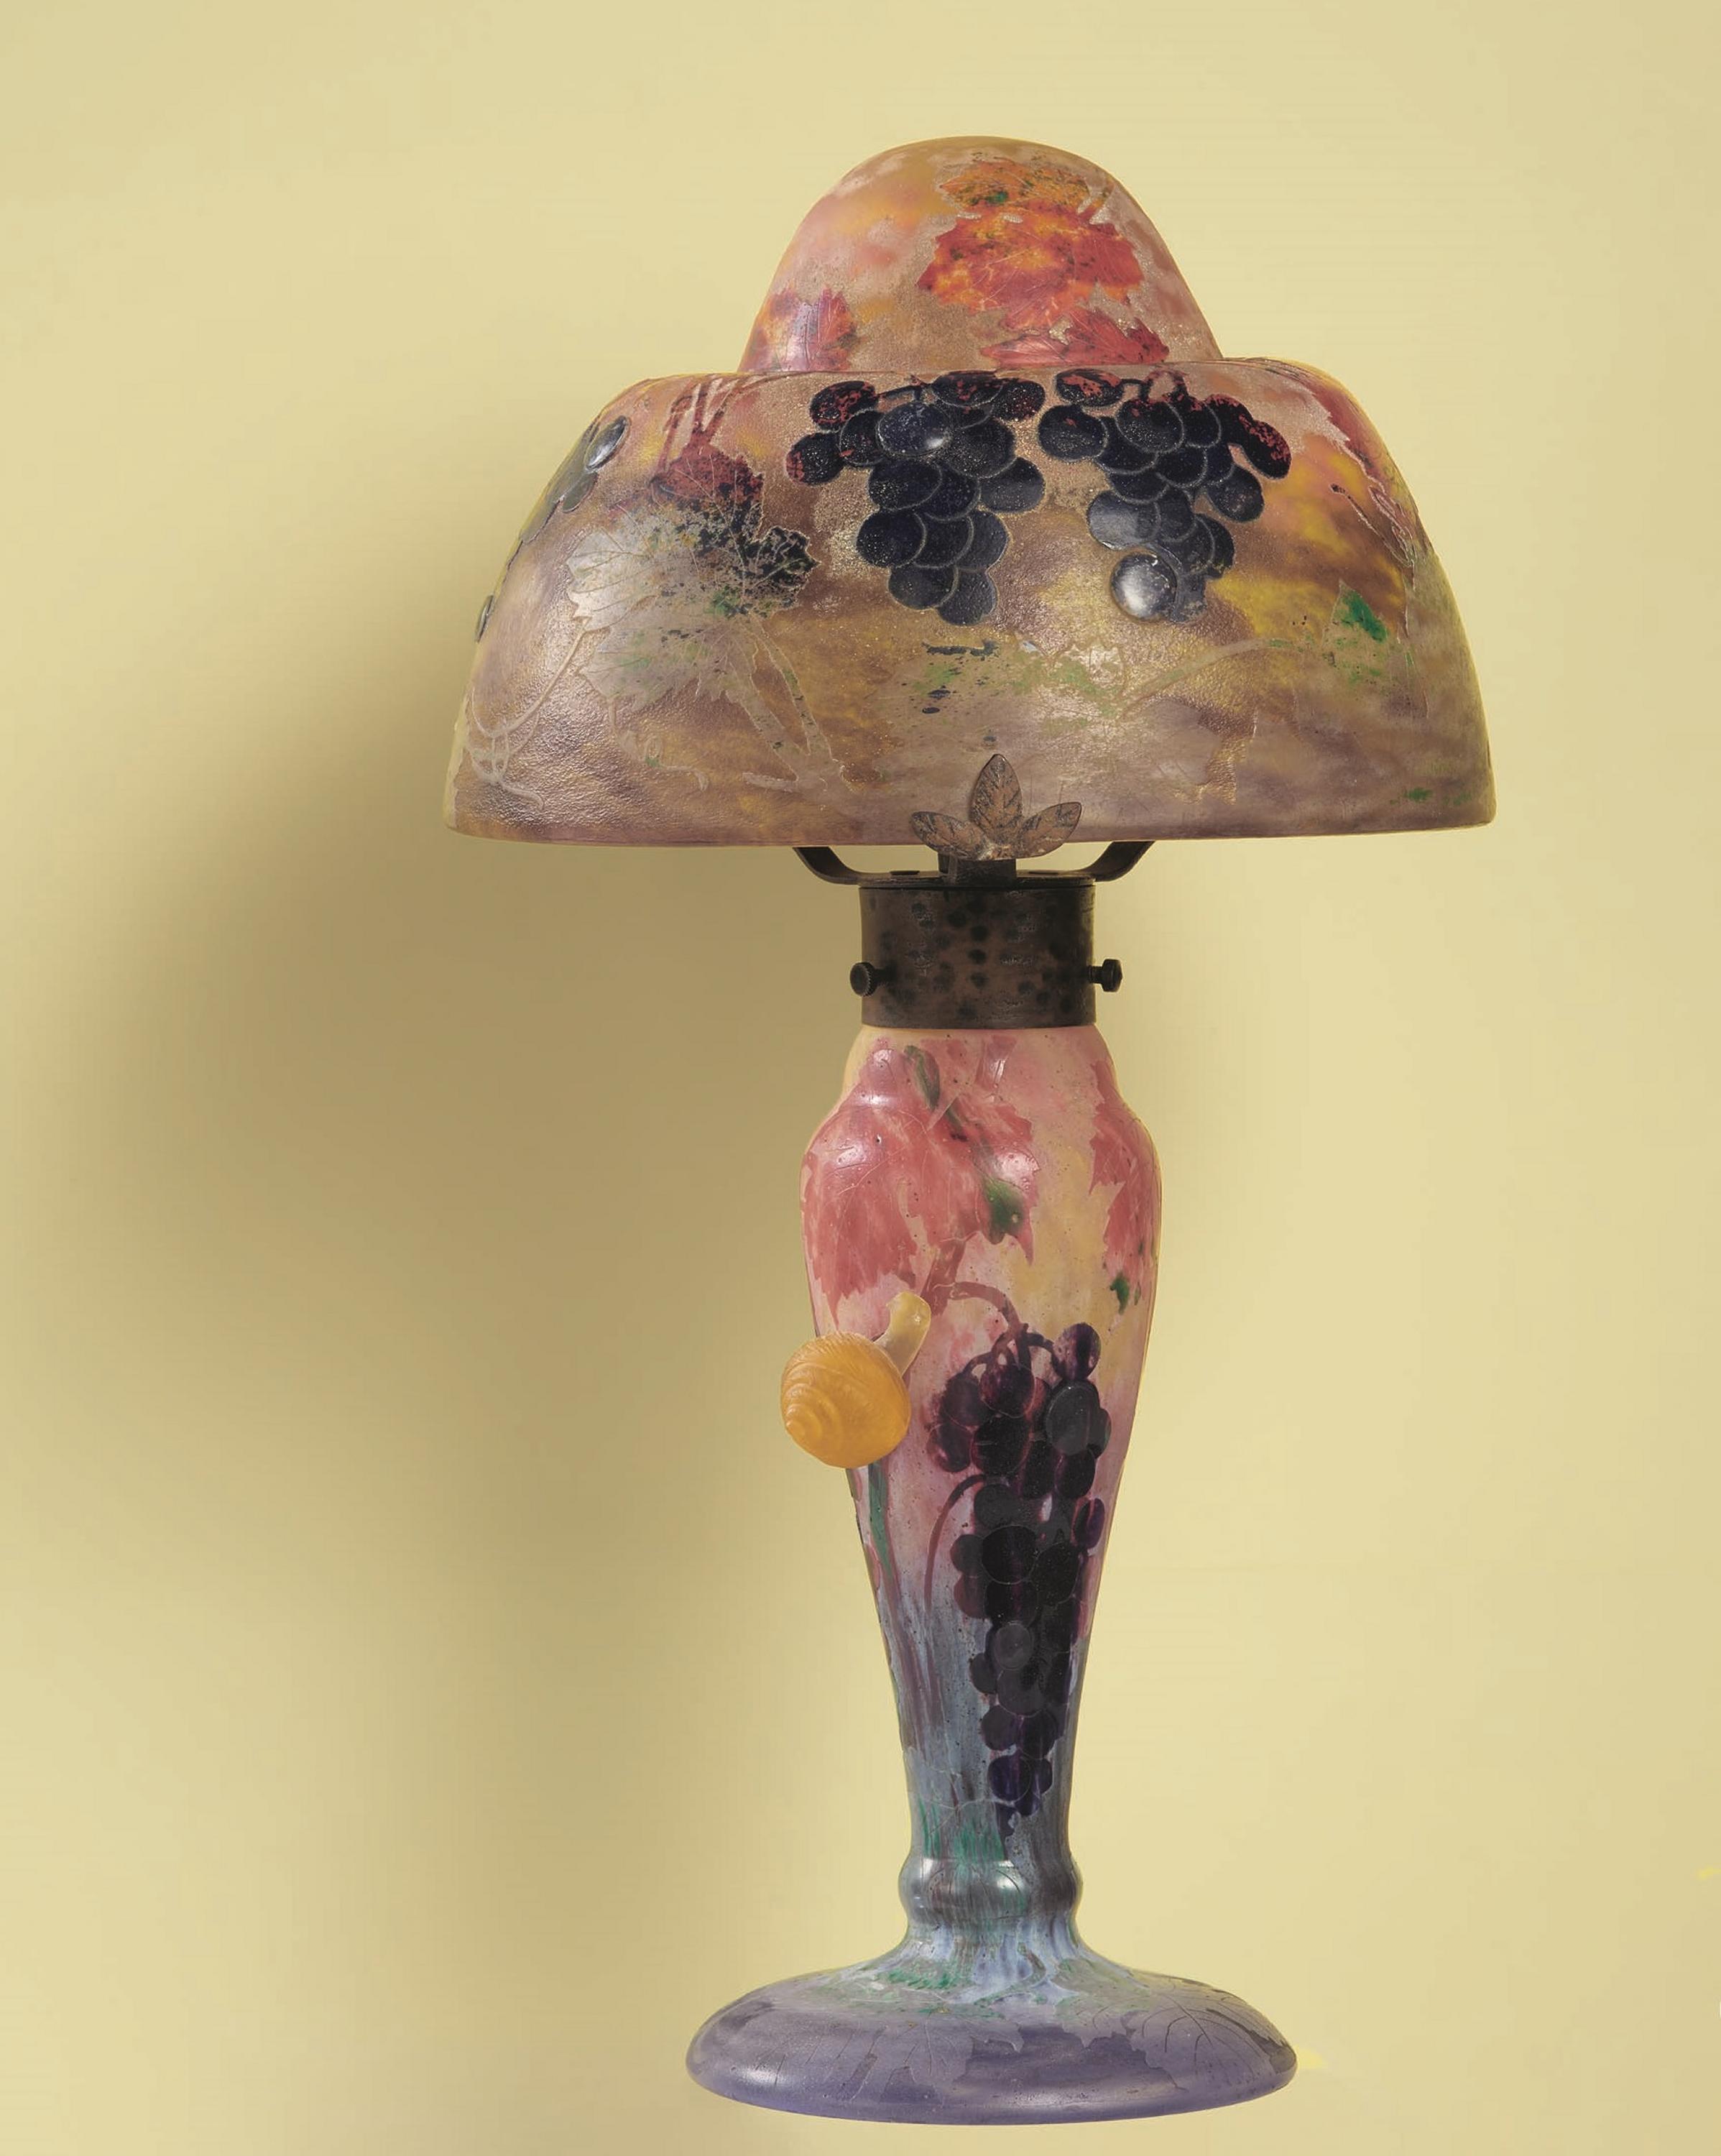 RARE GLASS TABLE LAMP 'VIGNE ET ESCARGOTS' WITH A SNAIL - Image 9 of 10